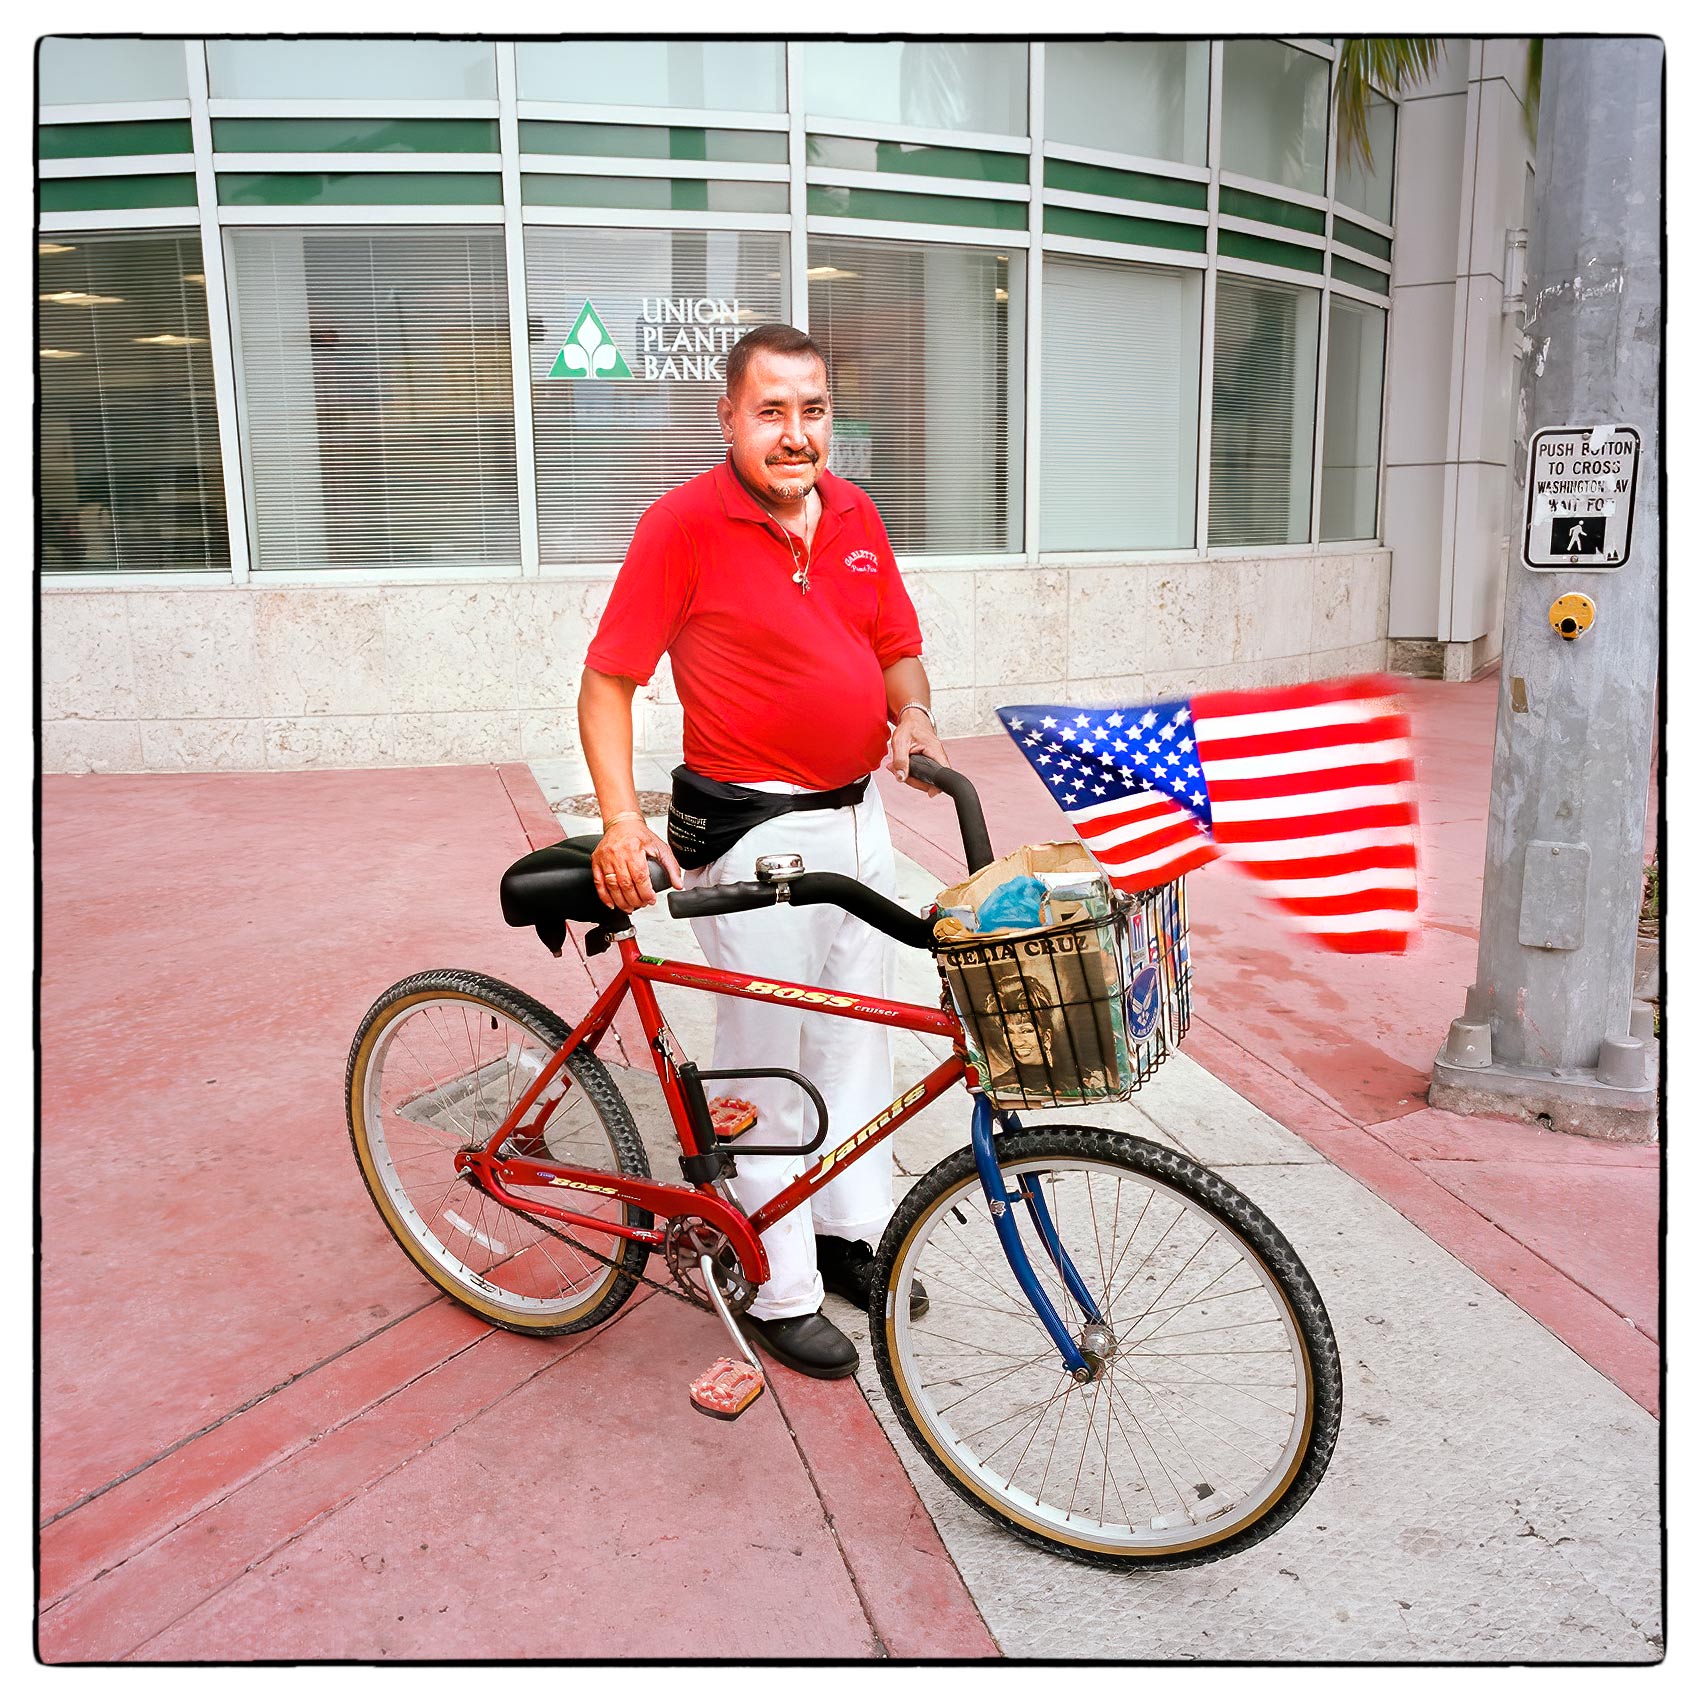 a-man-in-miami-poses-for-a-photo-with-his-bicycle-in-the-downtown-area